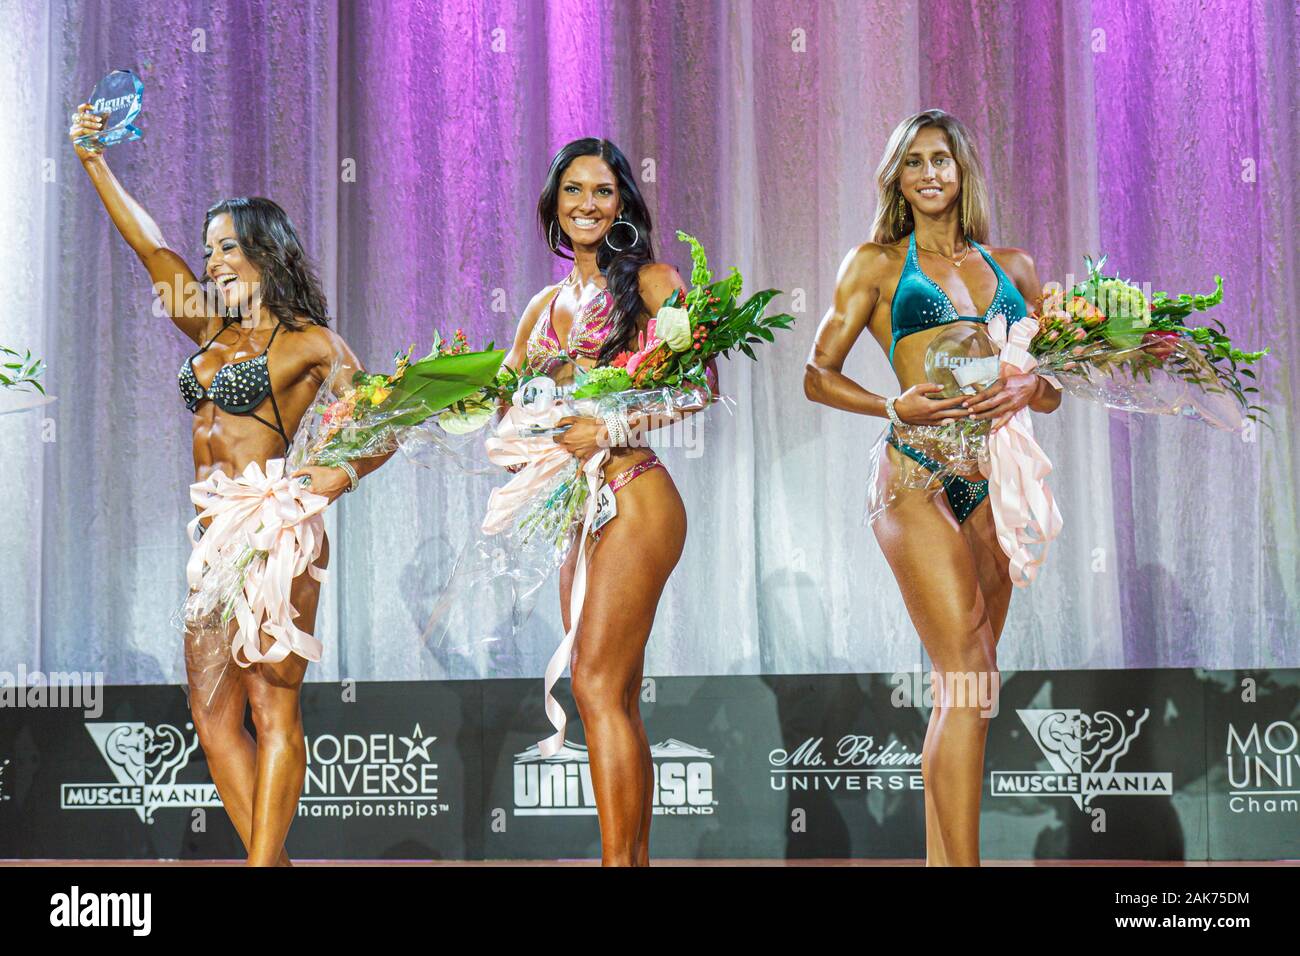 Miami Florida,Hyatt Regency Miami,hotel,Musclemania Universe & Expo,Fitness Pageant,swimsuit competition,stage,woman female women,bodybuilders,posing, Stock Photo